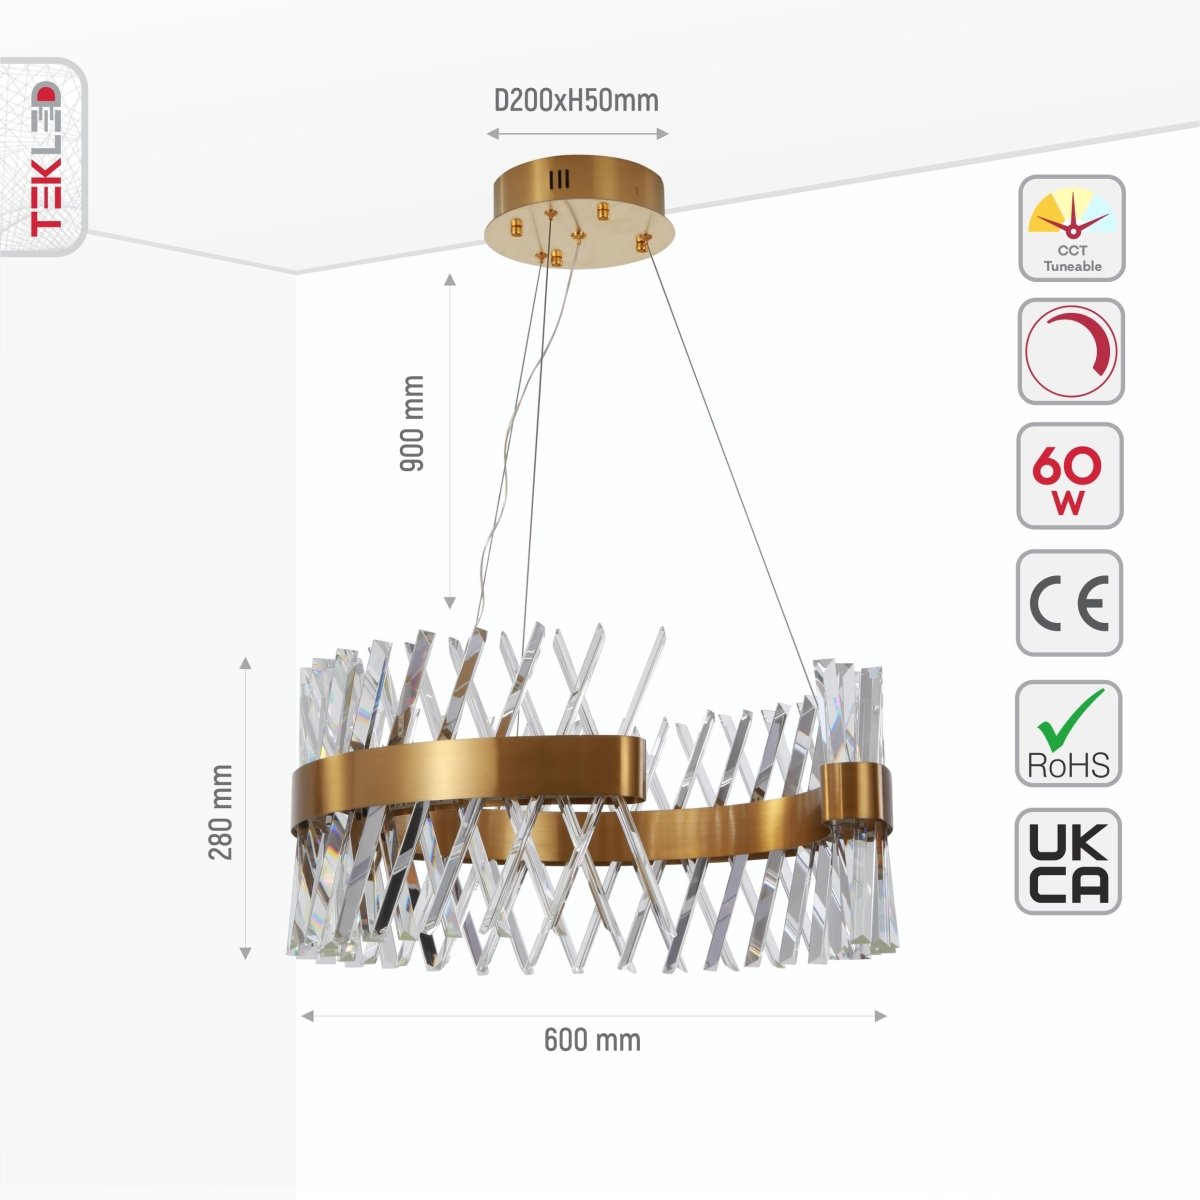 Size and specs of Brushed Bronze Metal Crystal Built-in LED Chandelier D600 60W Warm White | TEKLED 158-19844